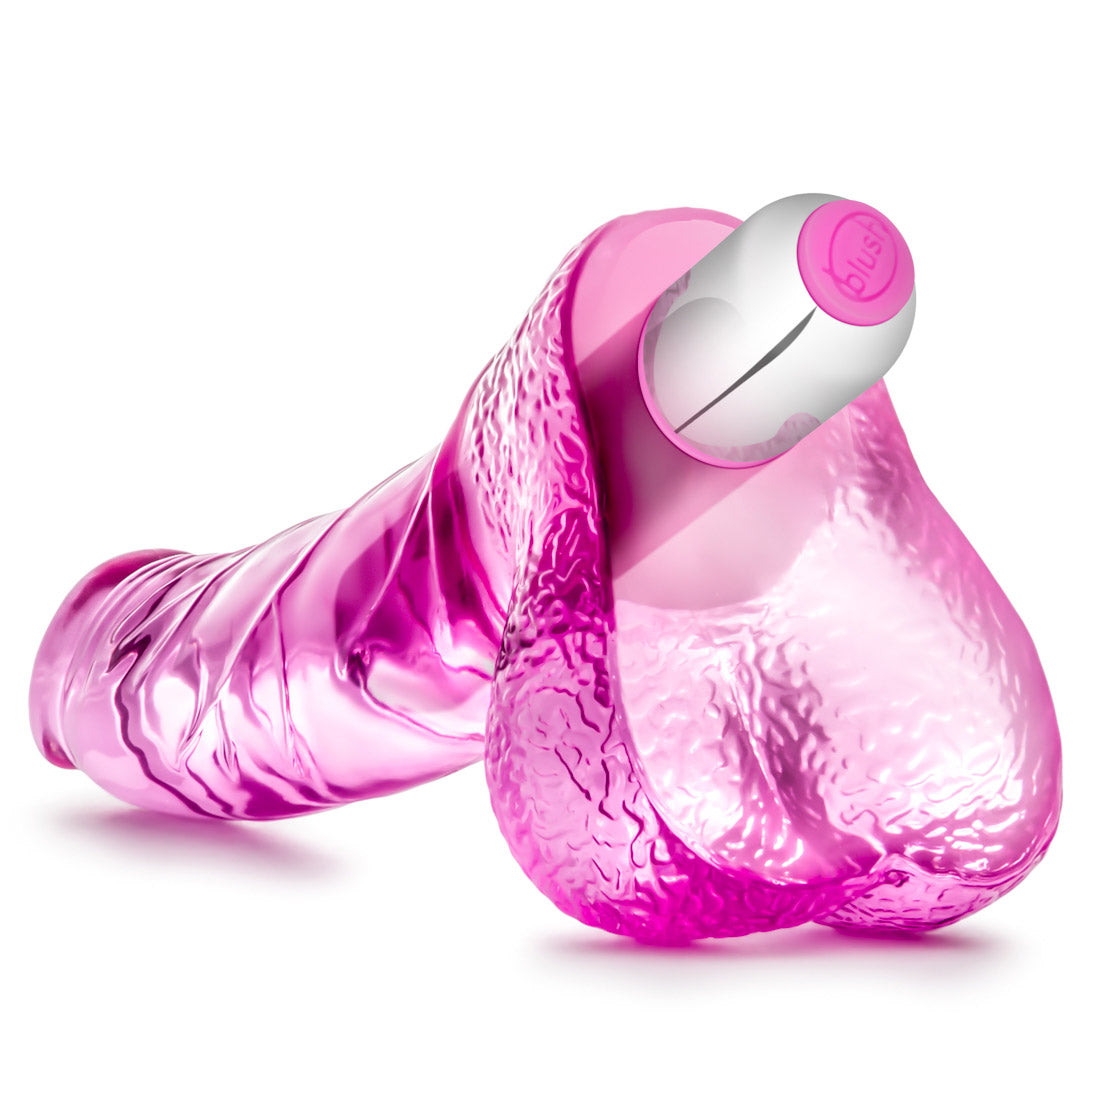 Naturally Yours Vibrating Ding Dildo